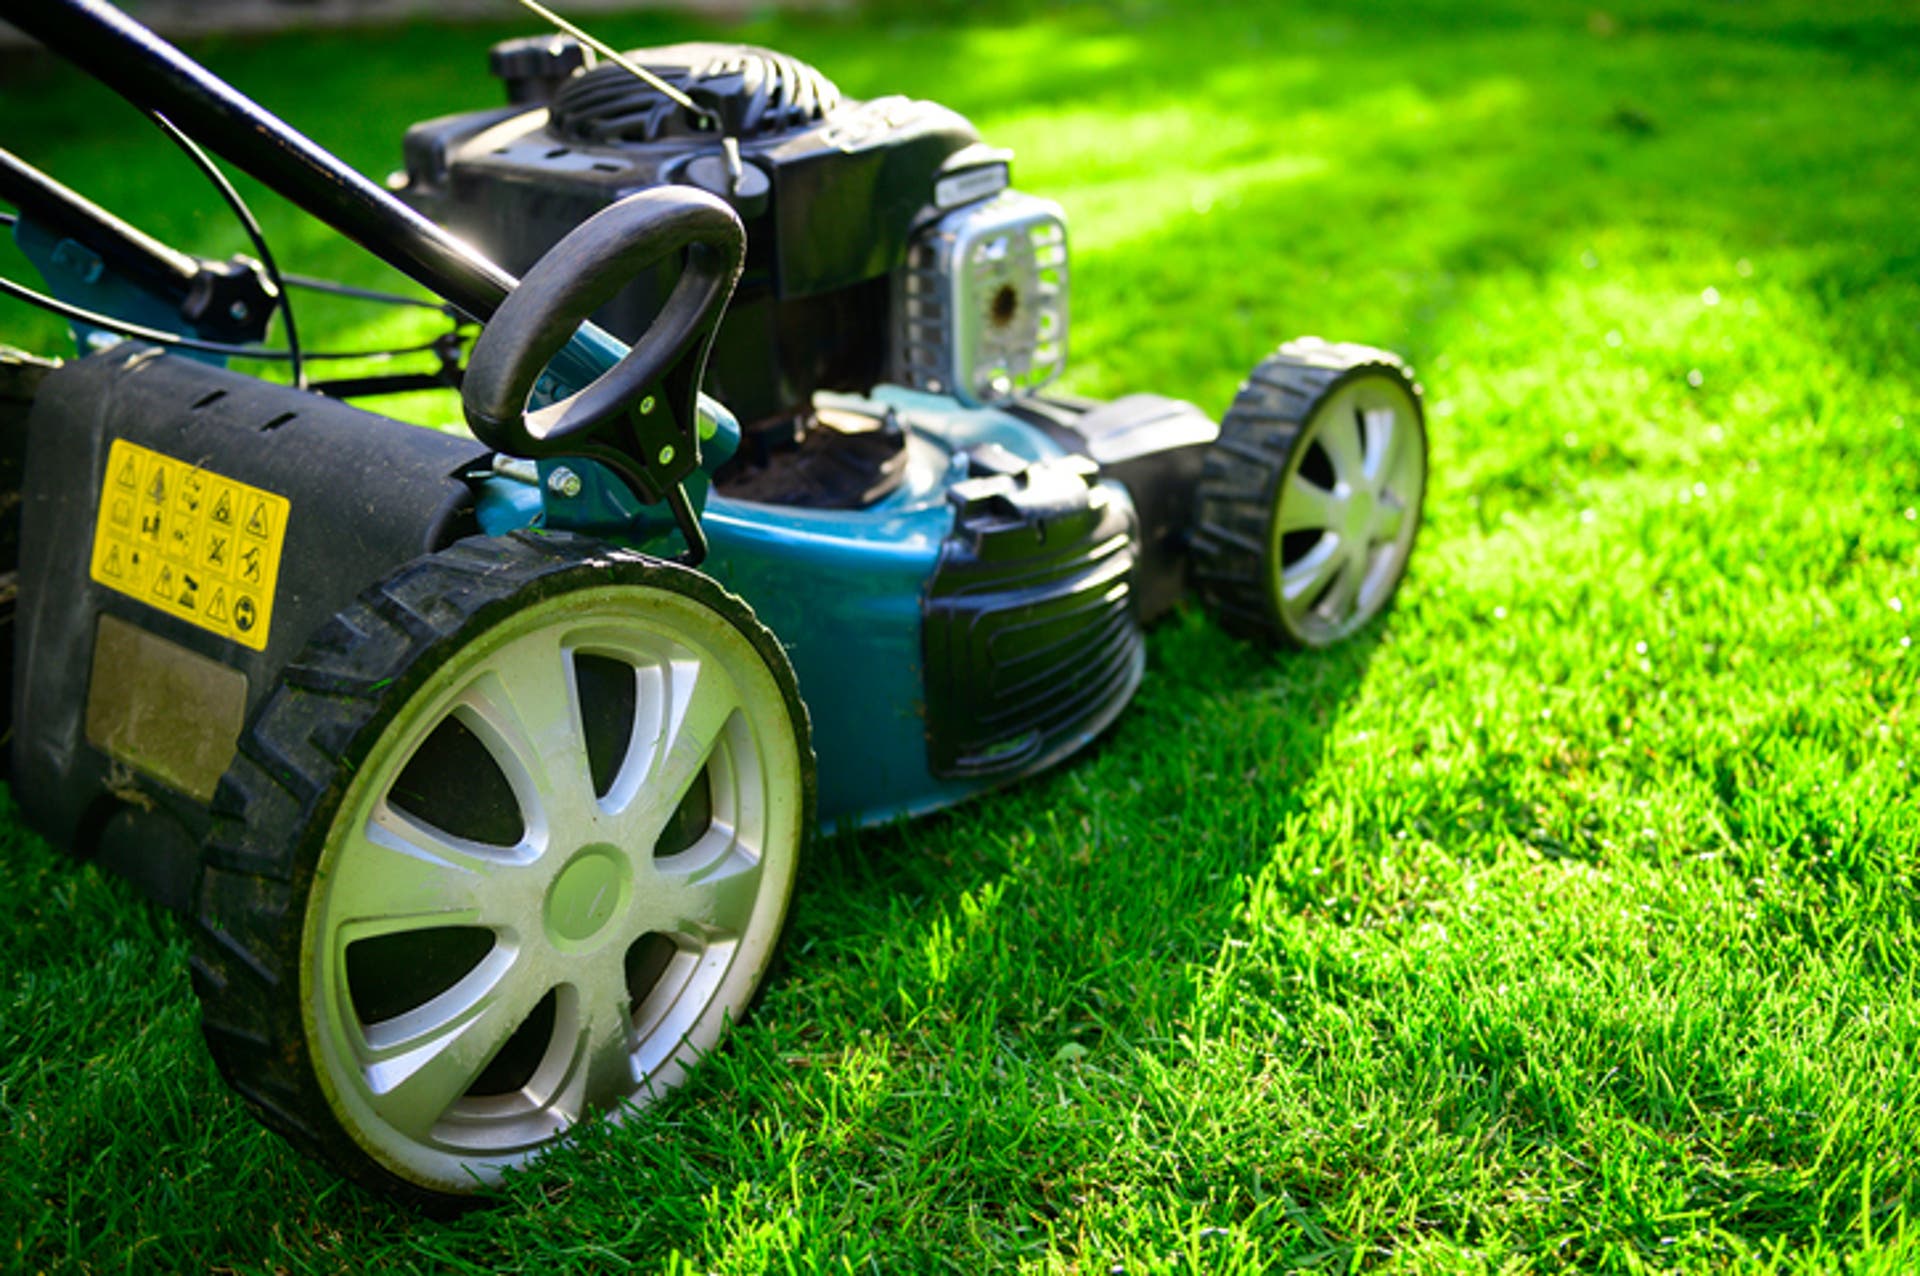  Lawn mower on green grass in a sunny day 